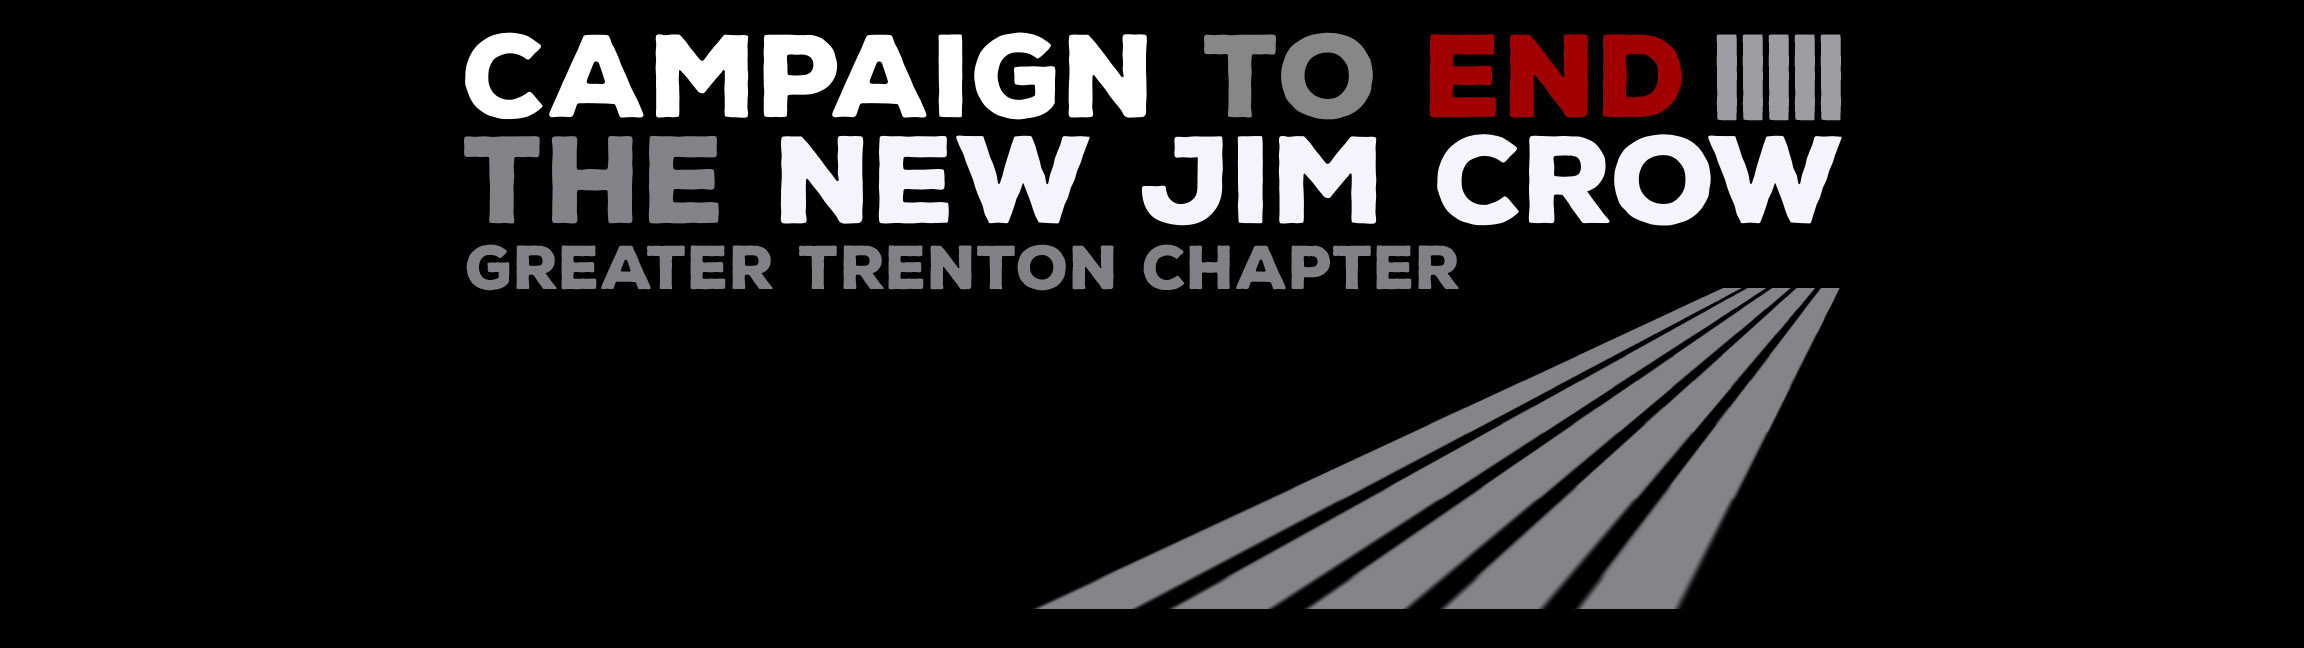 The Campaign to End the New Jim Crow - Trenton / Princeton Chapter